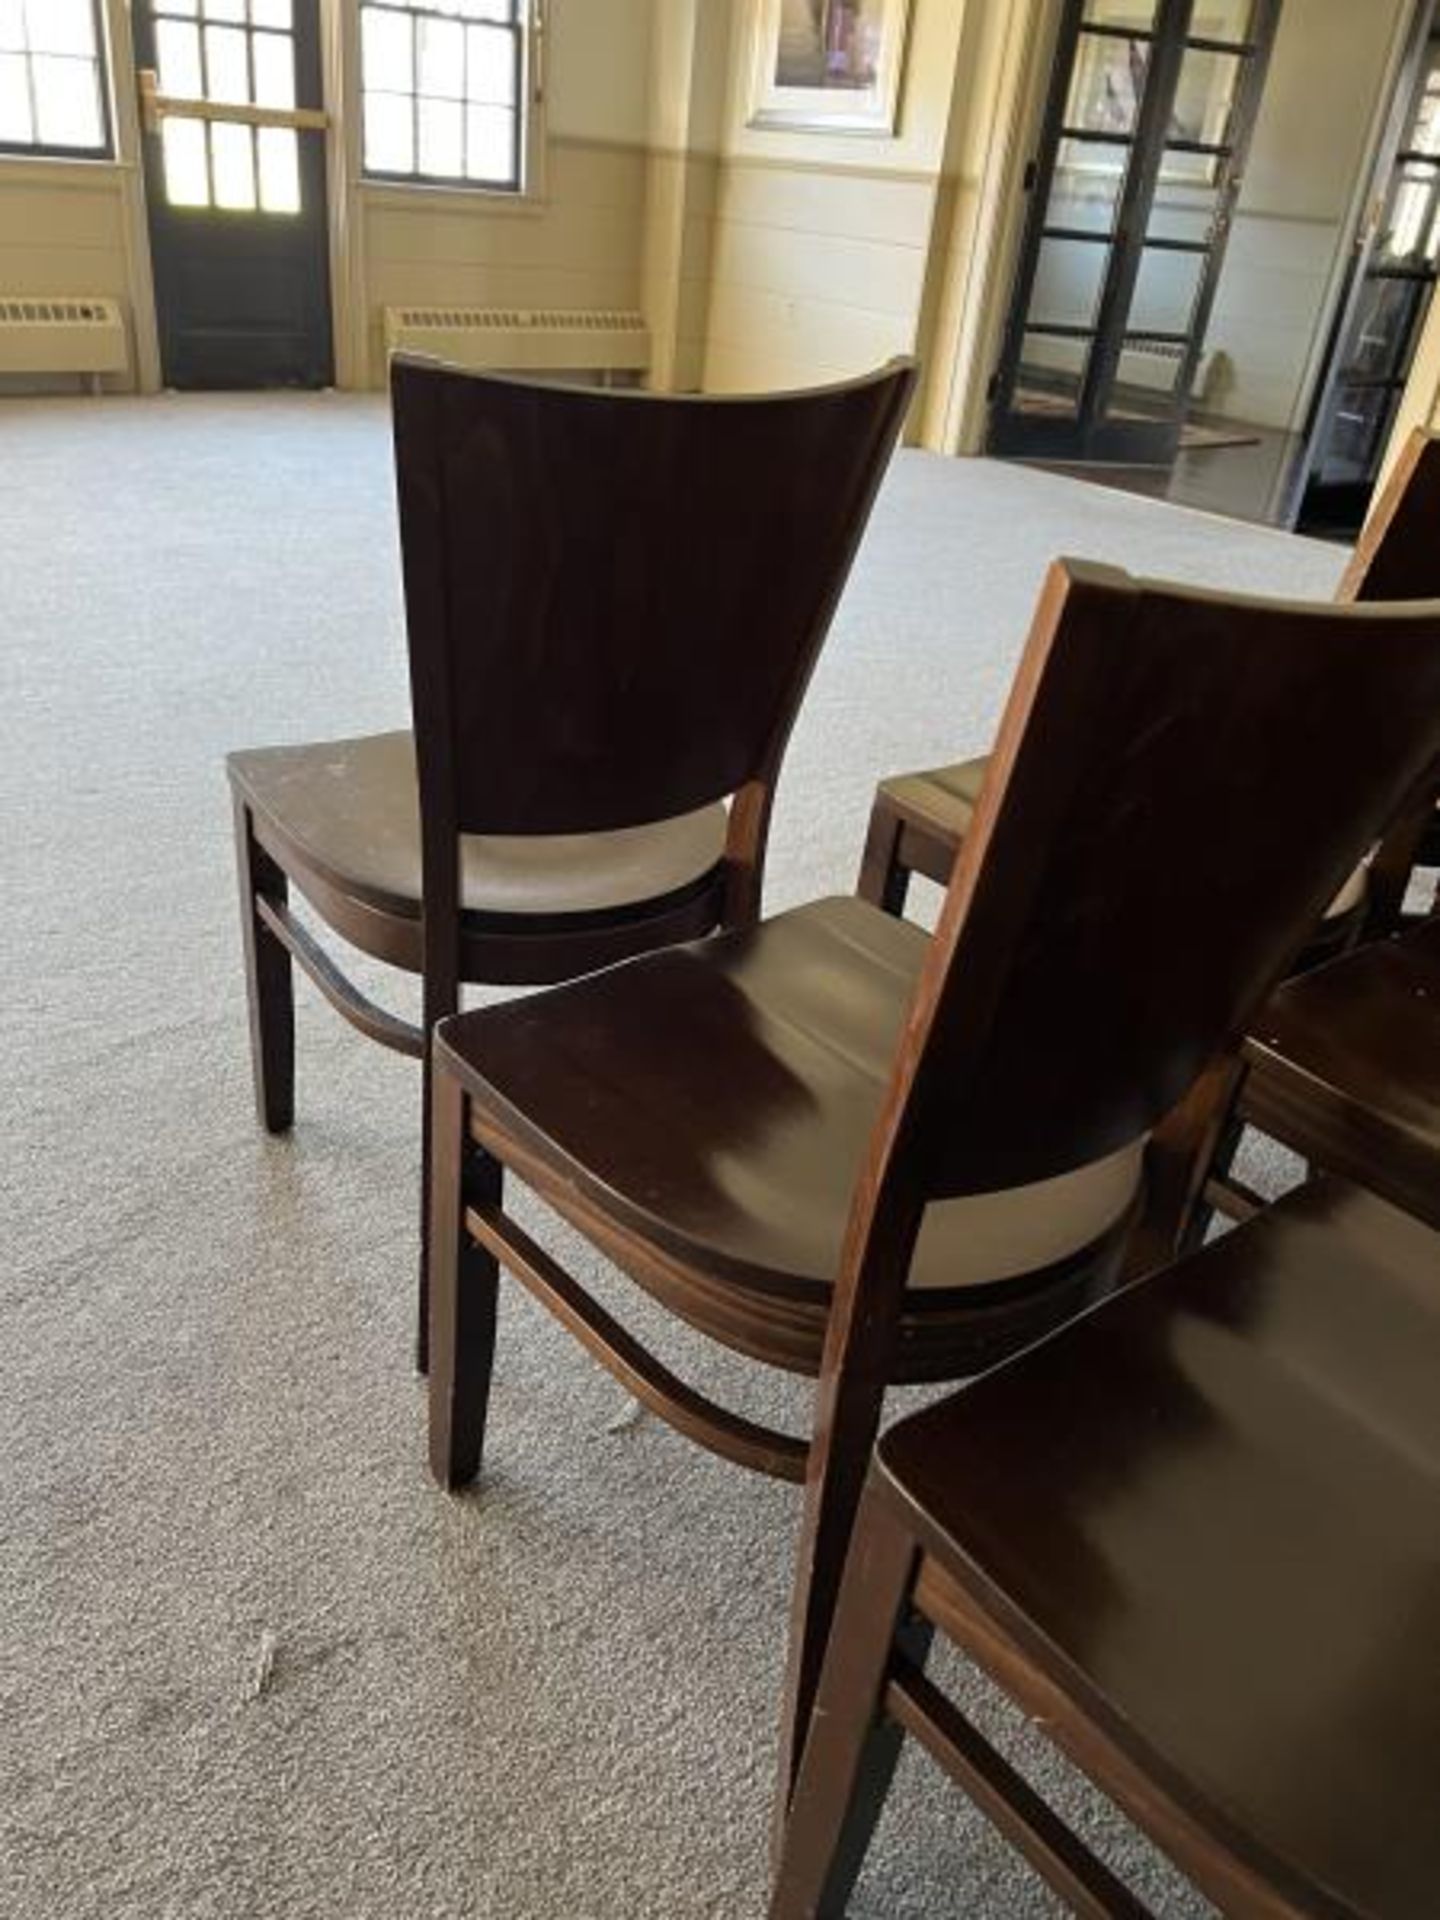 Lot of (28) Chairs, Wood Located R Front Room - Image 5 of 5